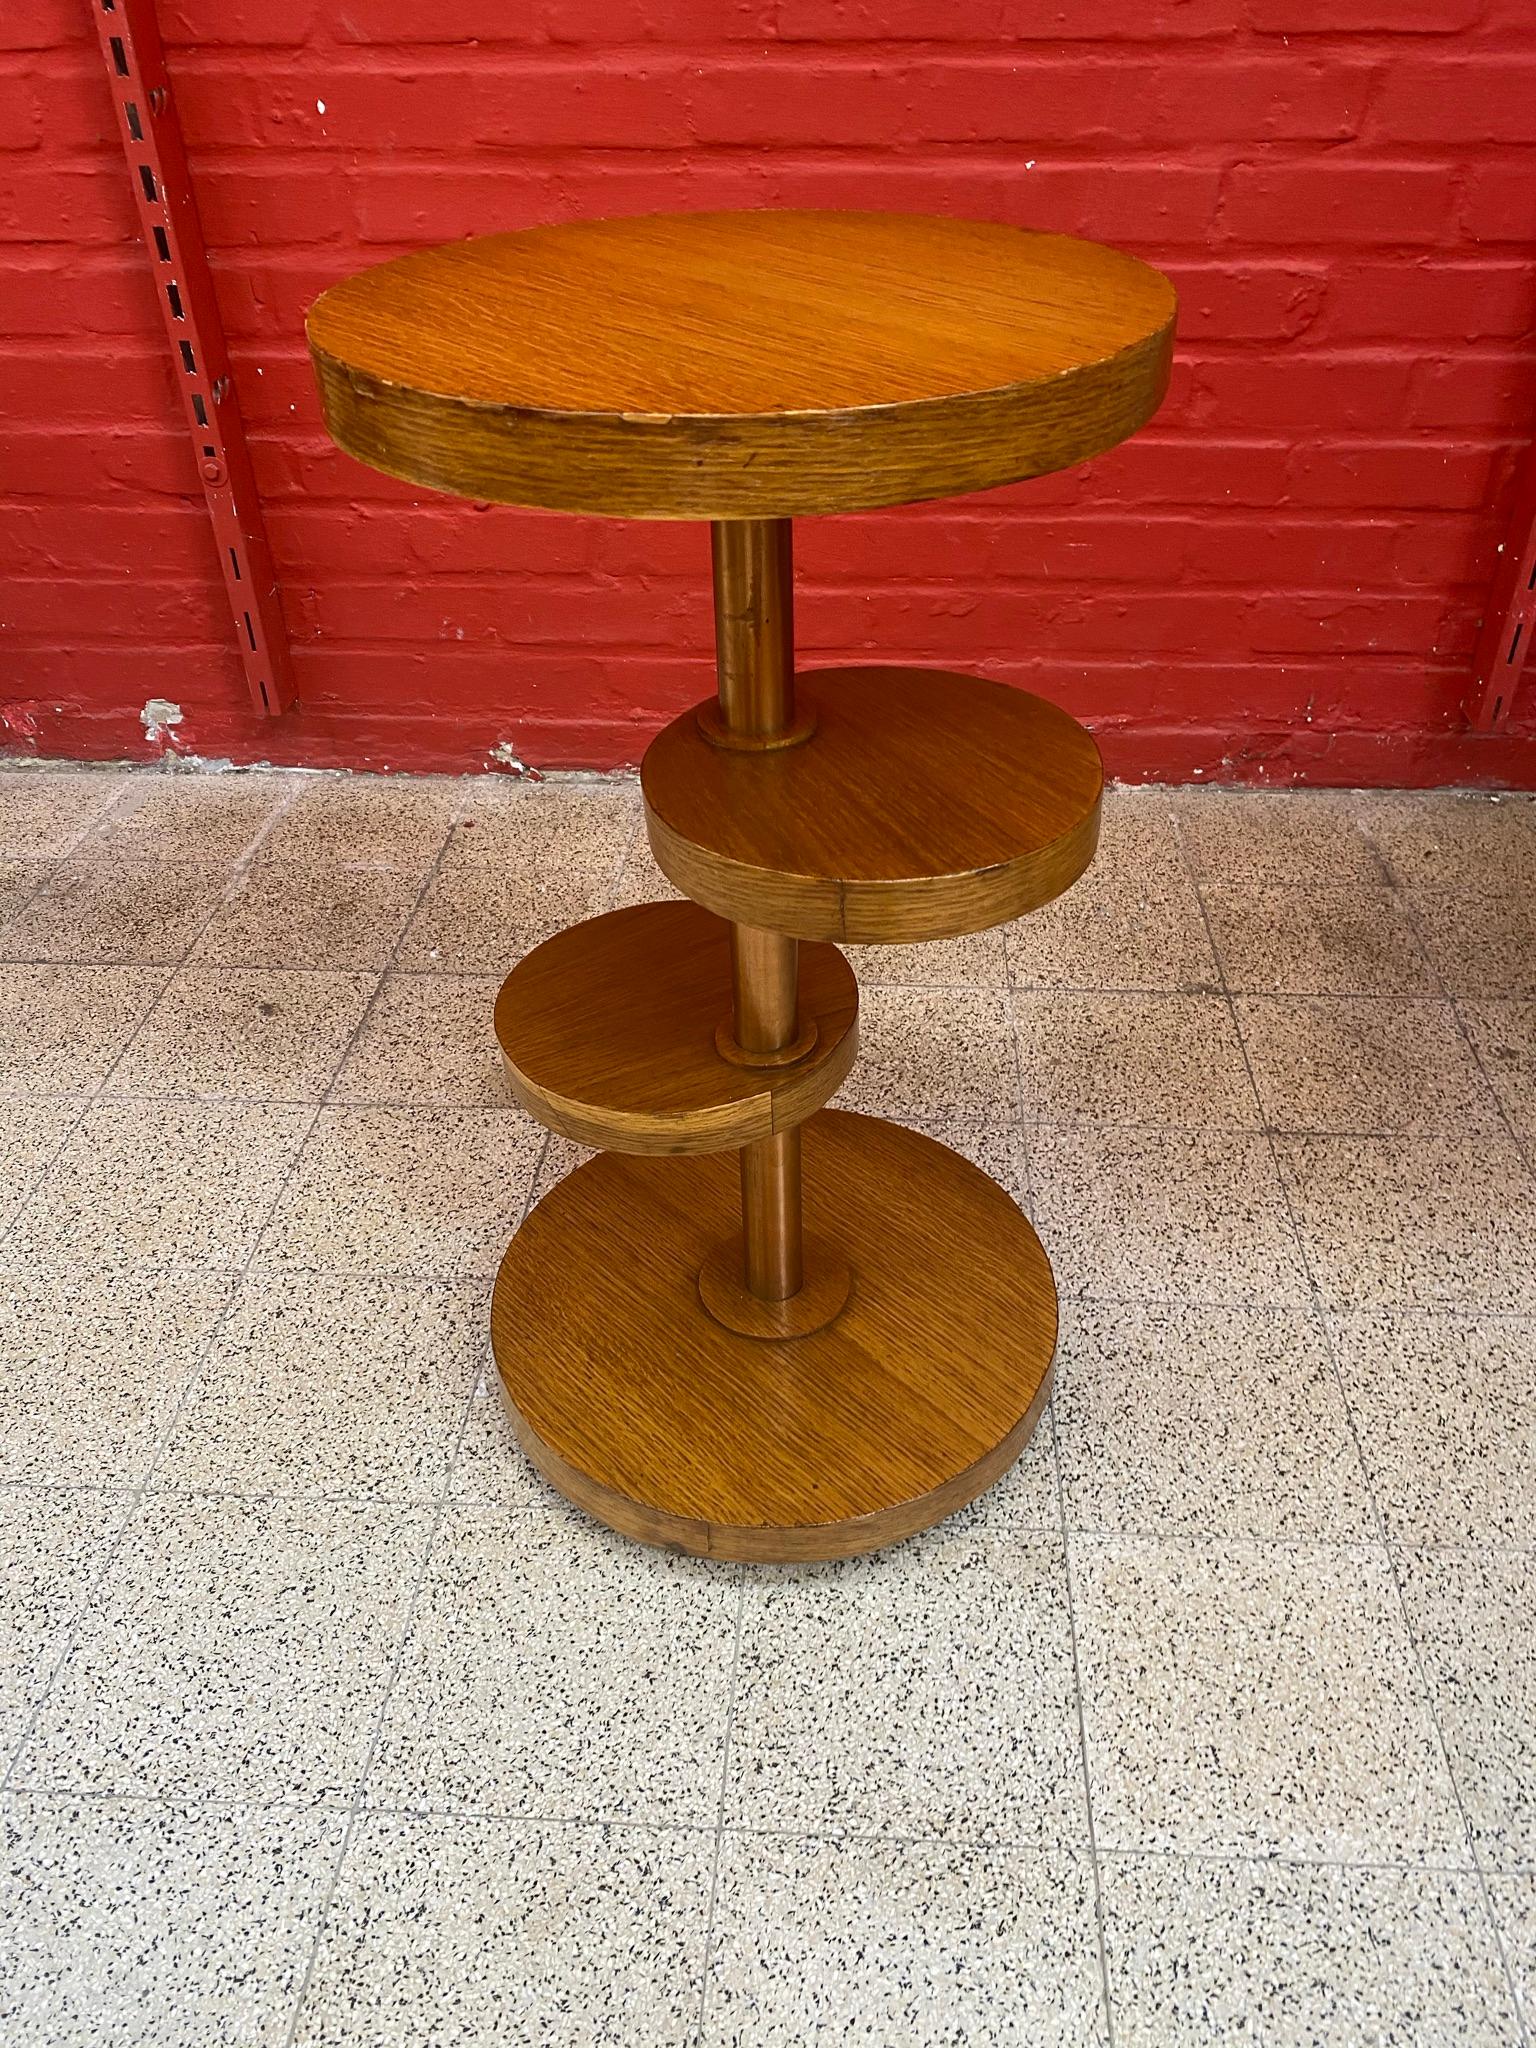 Modernist Art Deco Guéridon in Oak Veneer and Coppery Brass, circa 1930 In Good Condition For Sale In Saint-Ouen, FR